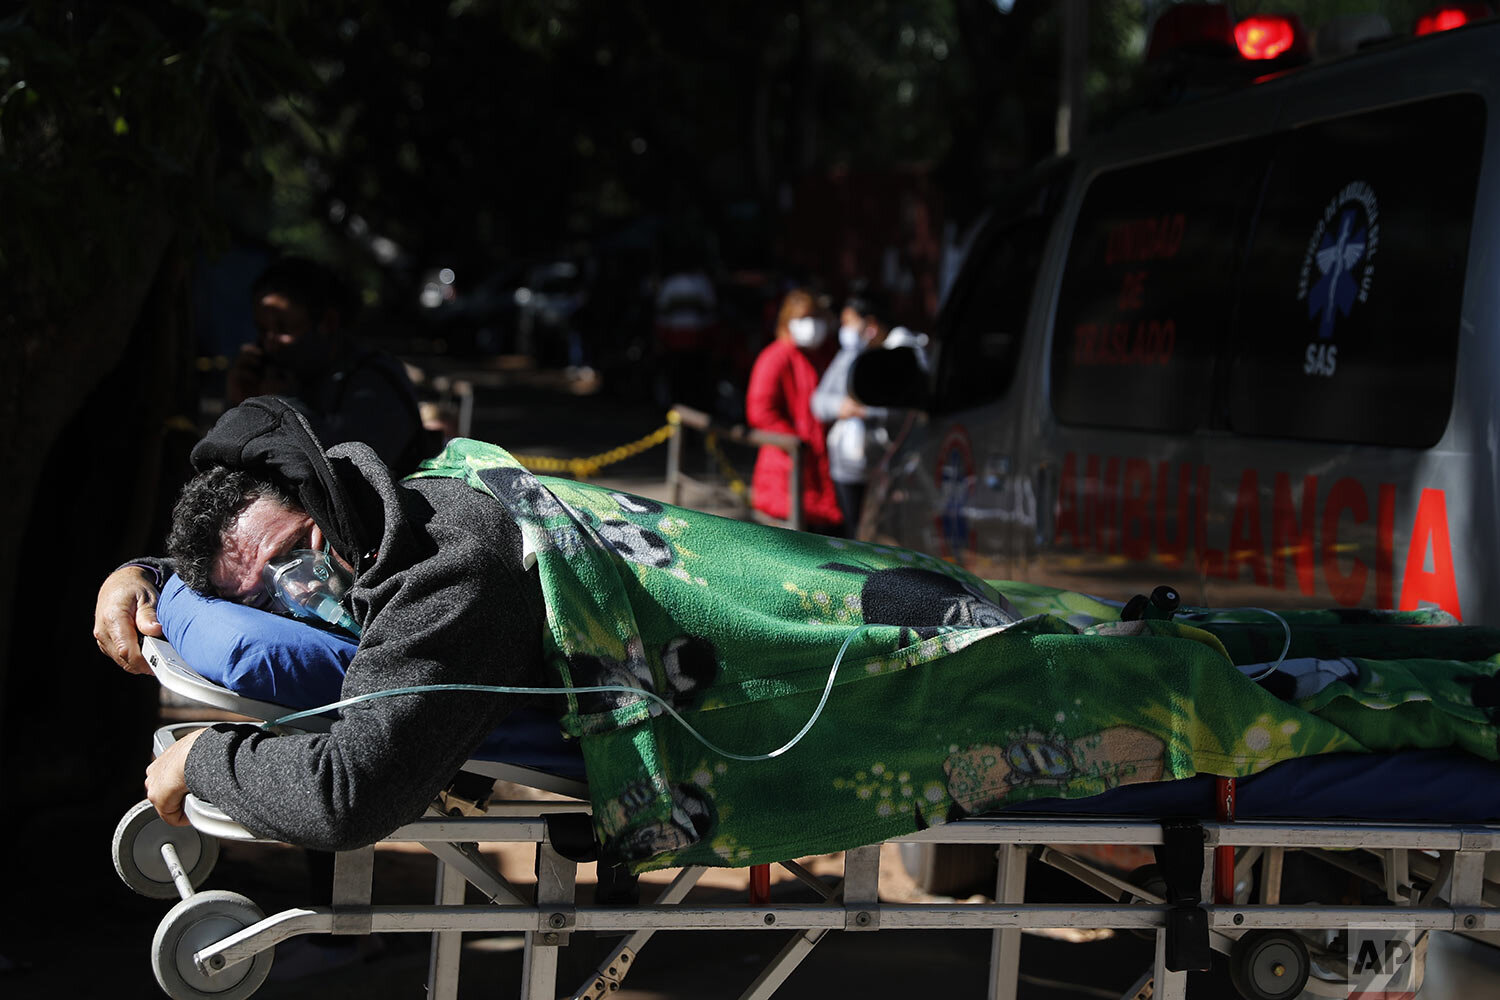  COVID-19 patient Eustaquio Ruiz lies on a stretcher outside the ICU of the Ineram Hospital, the fourth clinic where he was taken in search of a hospital with room in Asuncion, Paraguay, May 24, 2021. The 46-year-old was put back into the ambulance t